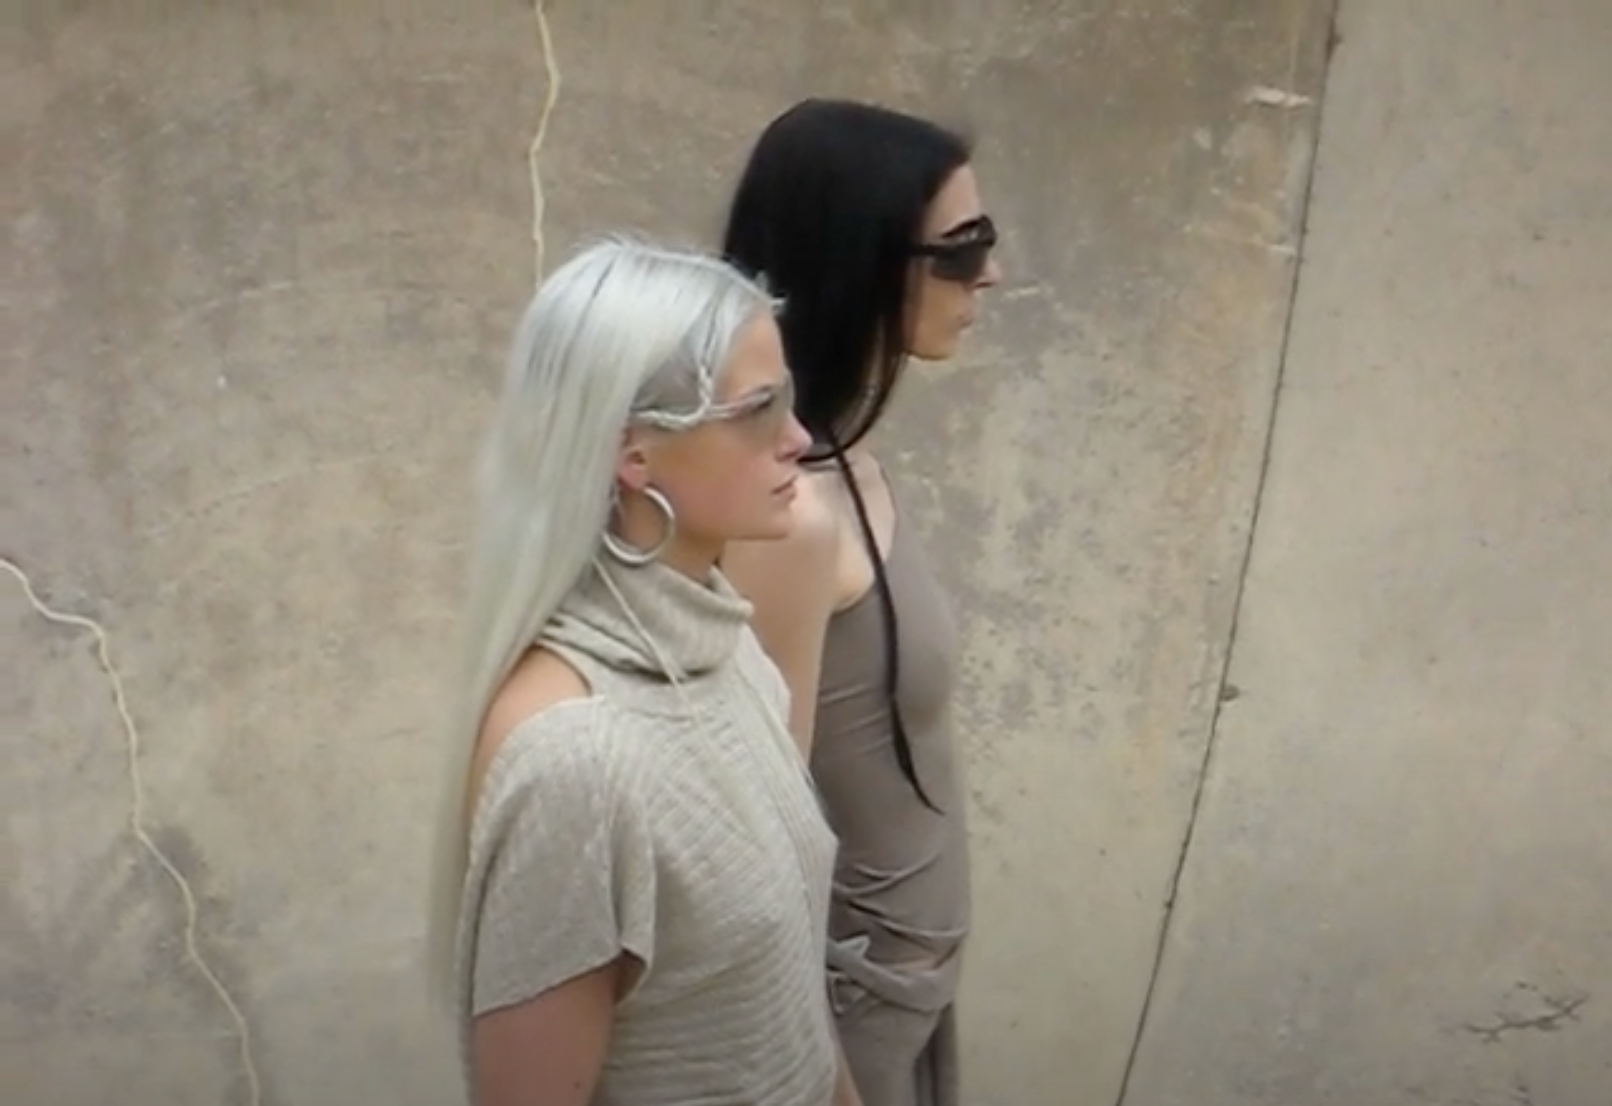 Load video: A video project by Greta Bell with styling by Savanna Wills, designer of the &quot;SWiLLS&quot; label. Features SWiLLS rattails, hairs 001 bag, and Dune knit sweater.